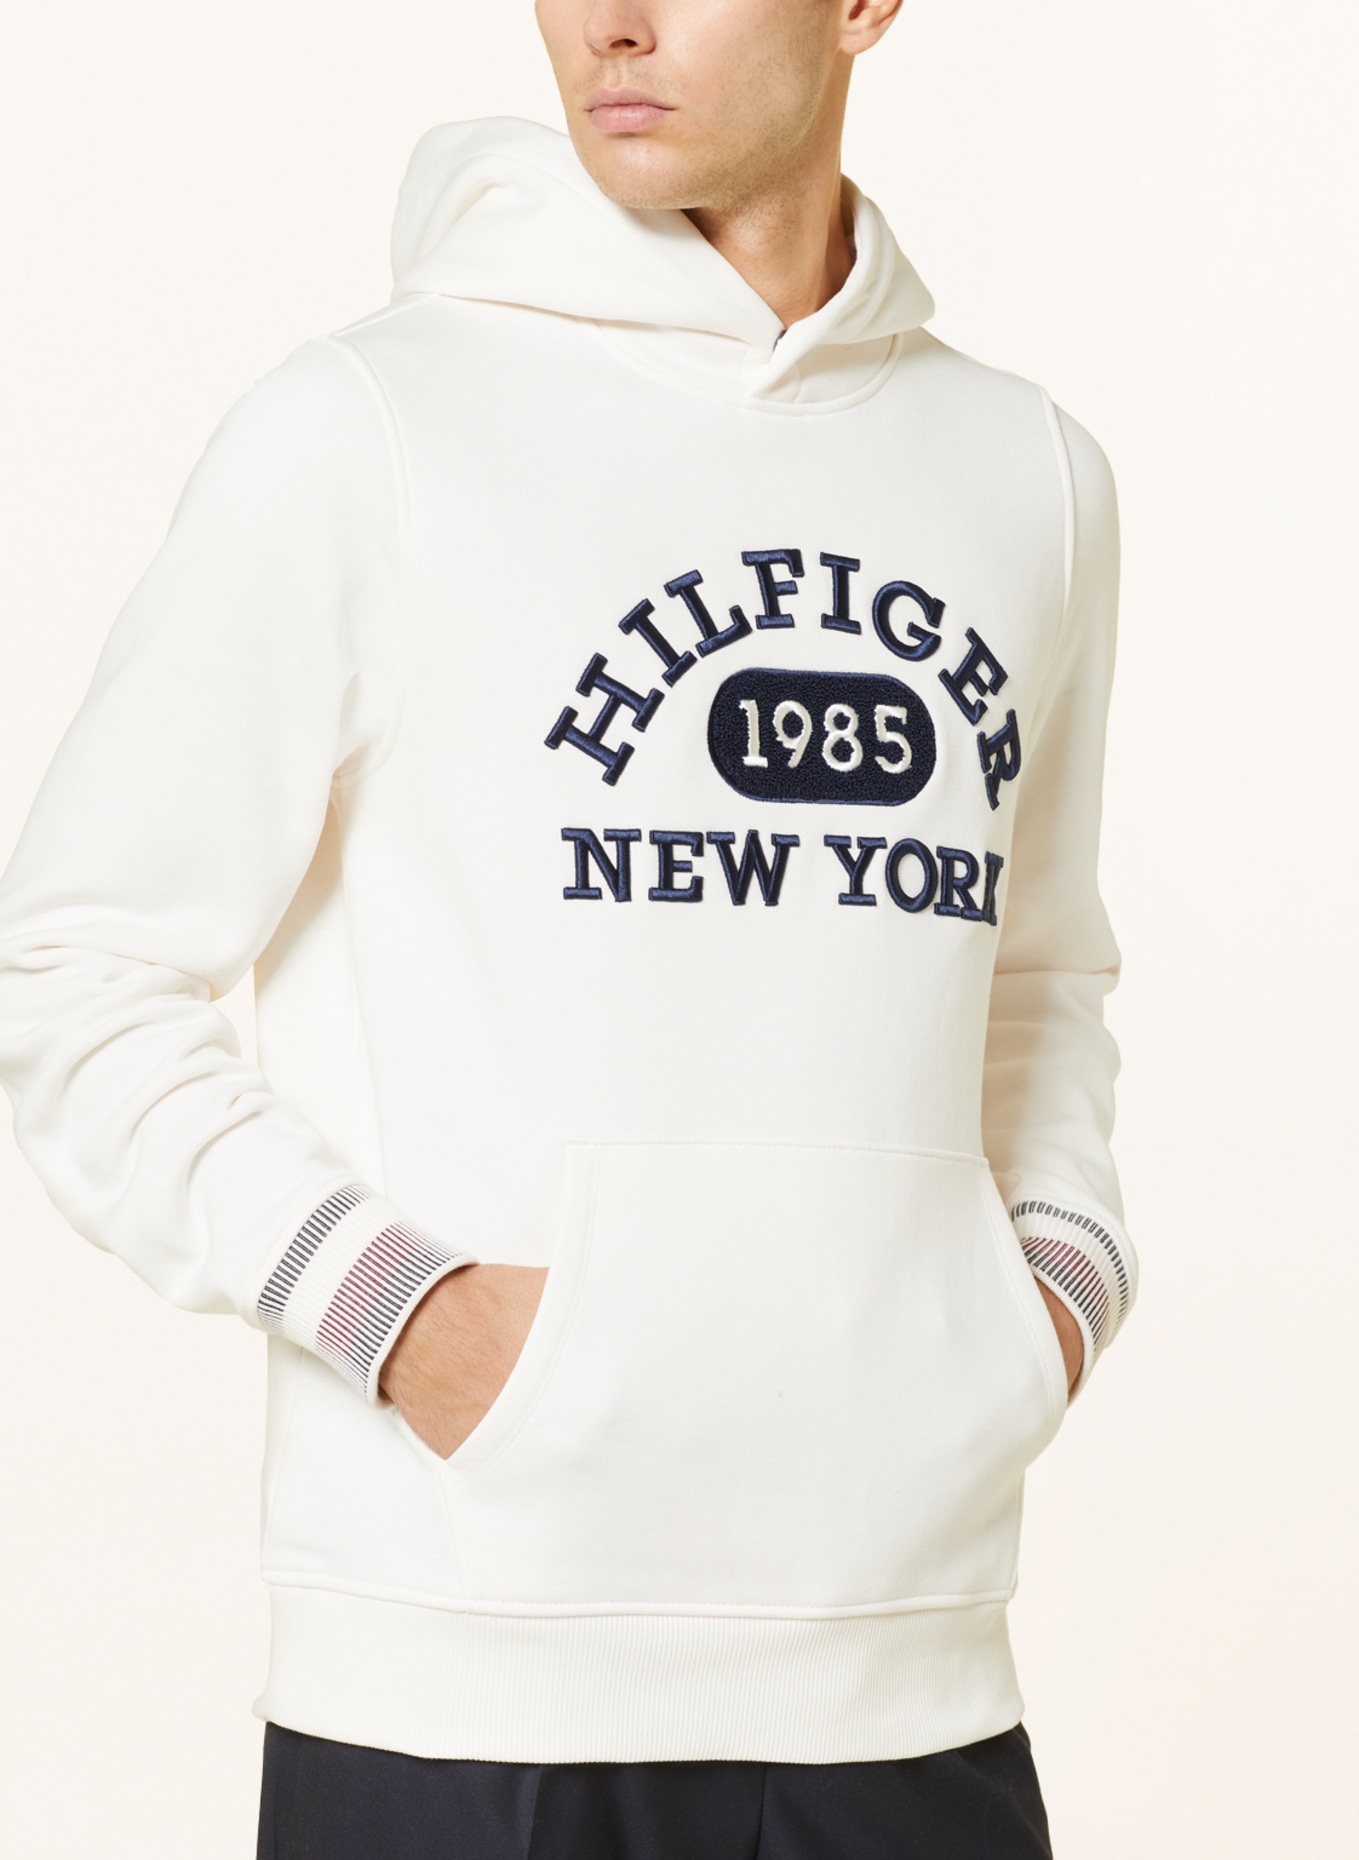 TOMMY HILFIGER Hoodie, Color: WHITE (Image 5)